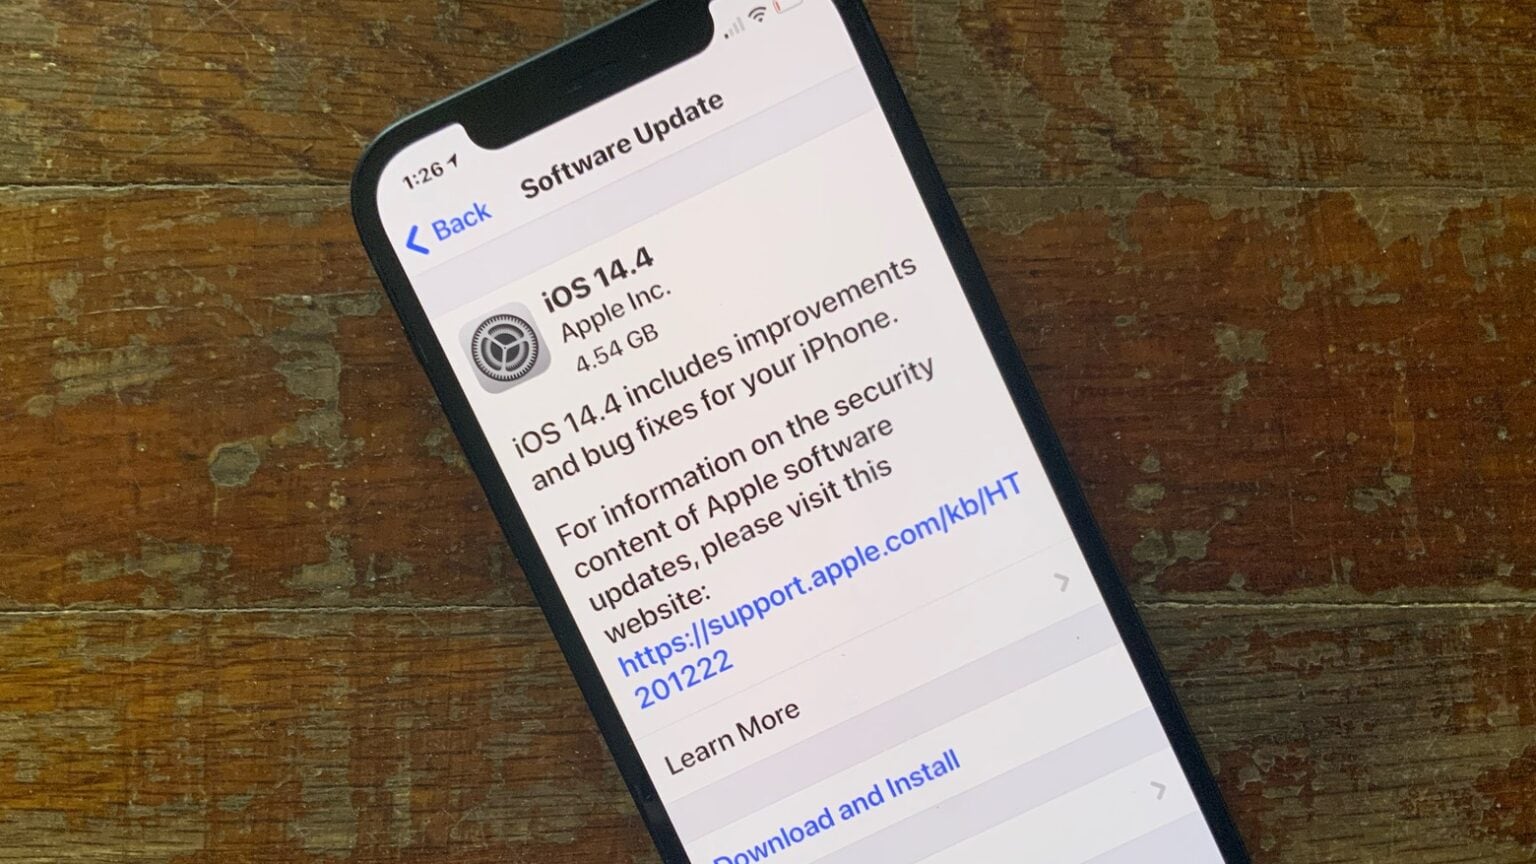 iOS 14.4 debuted to the general public on Tuesday.